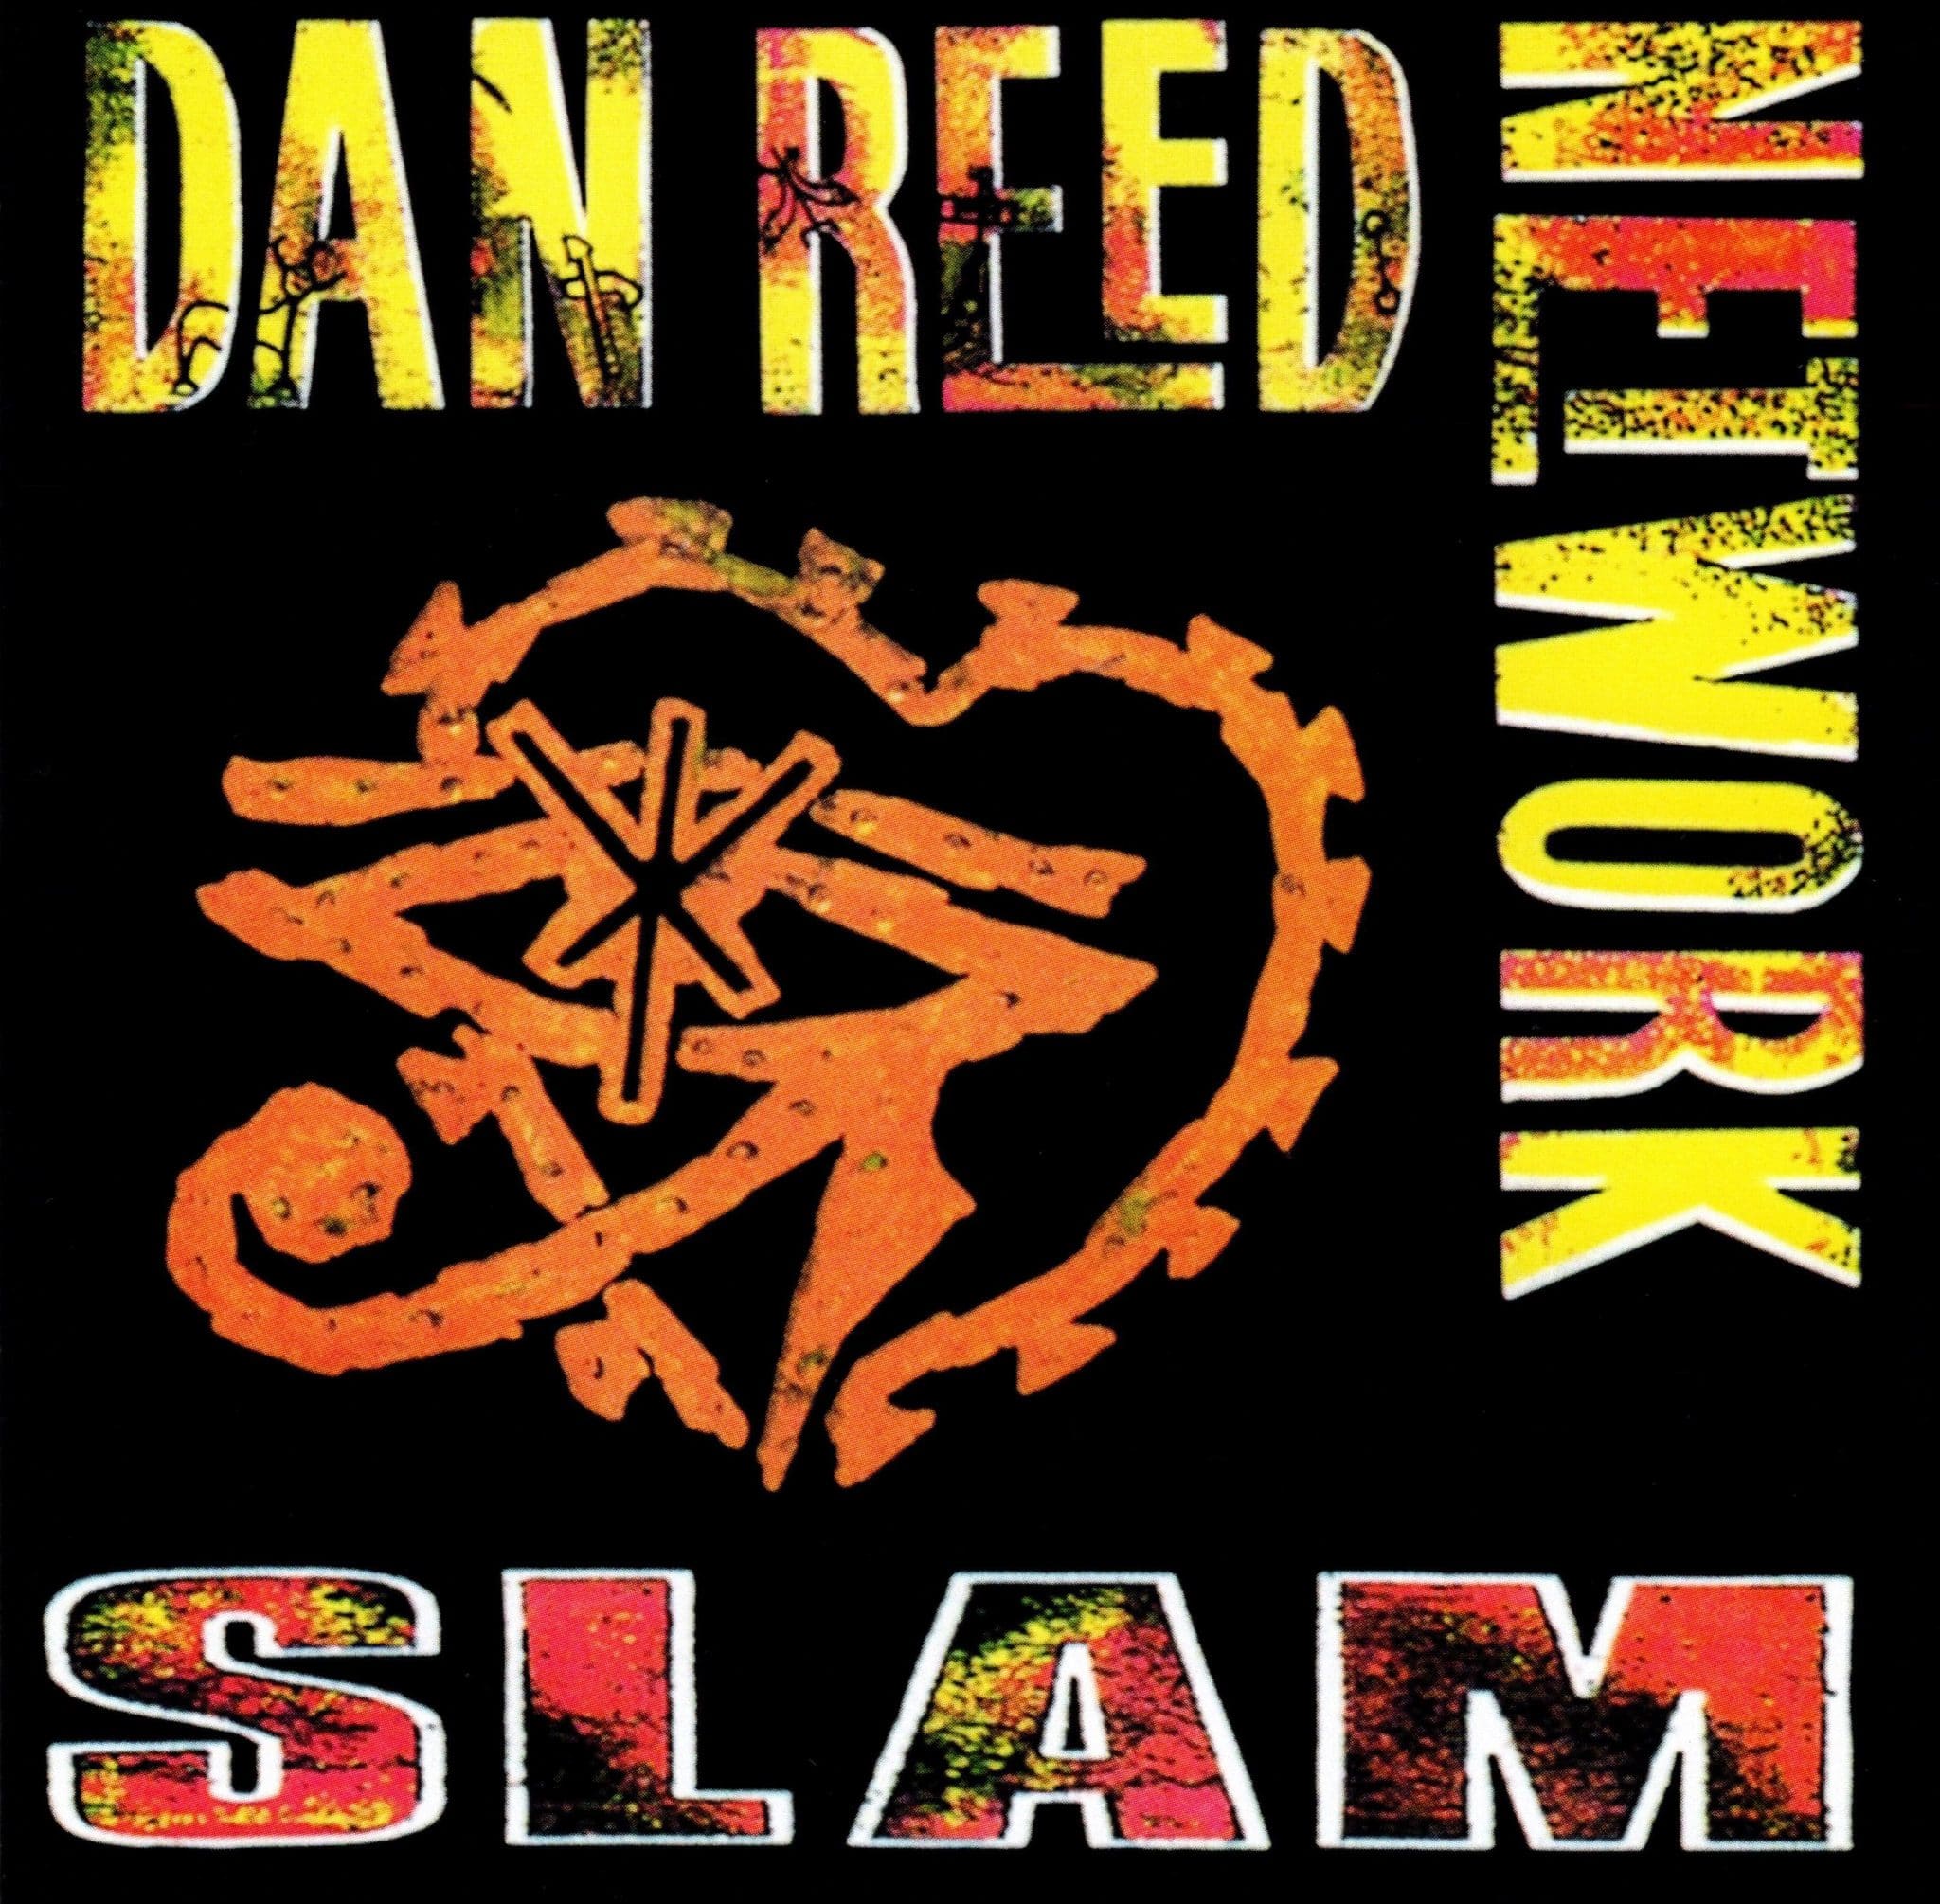 Dan Reed Network: Two Albums Reissues